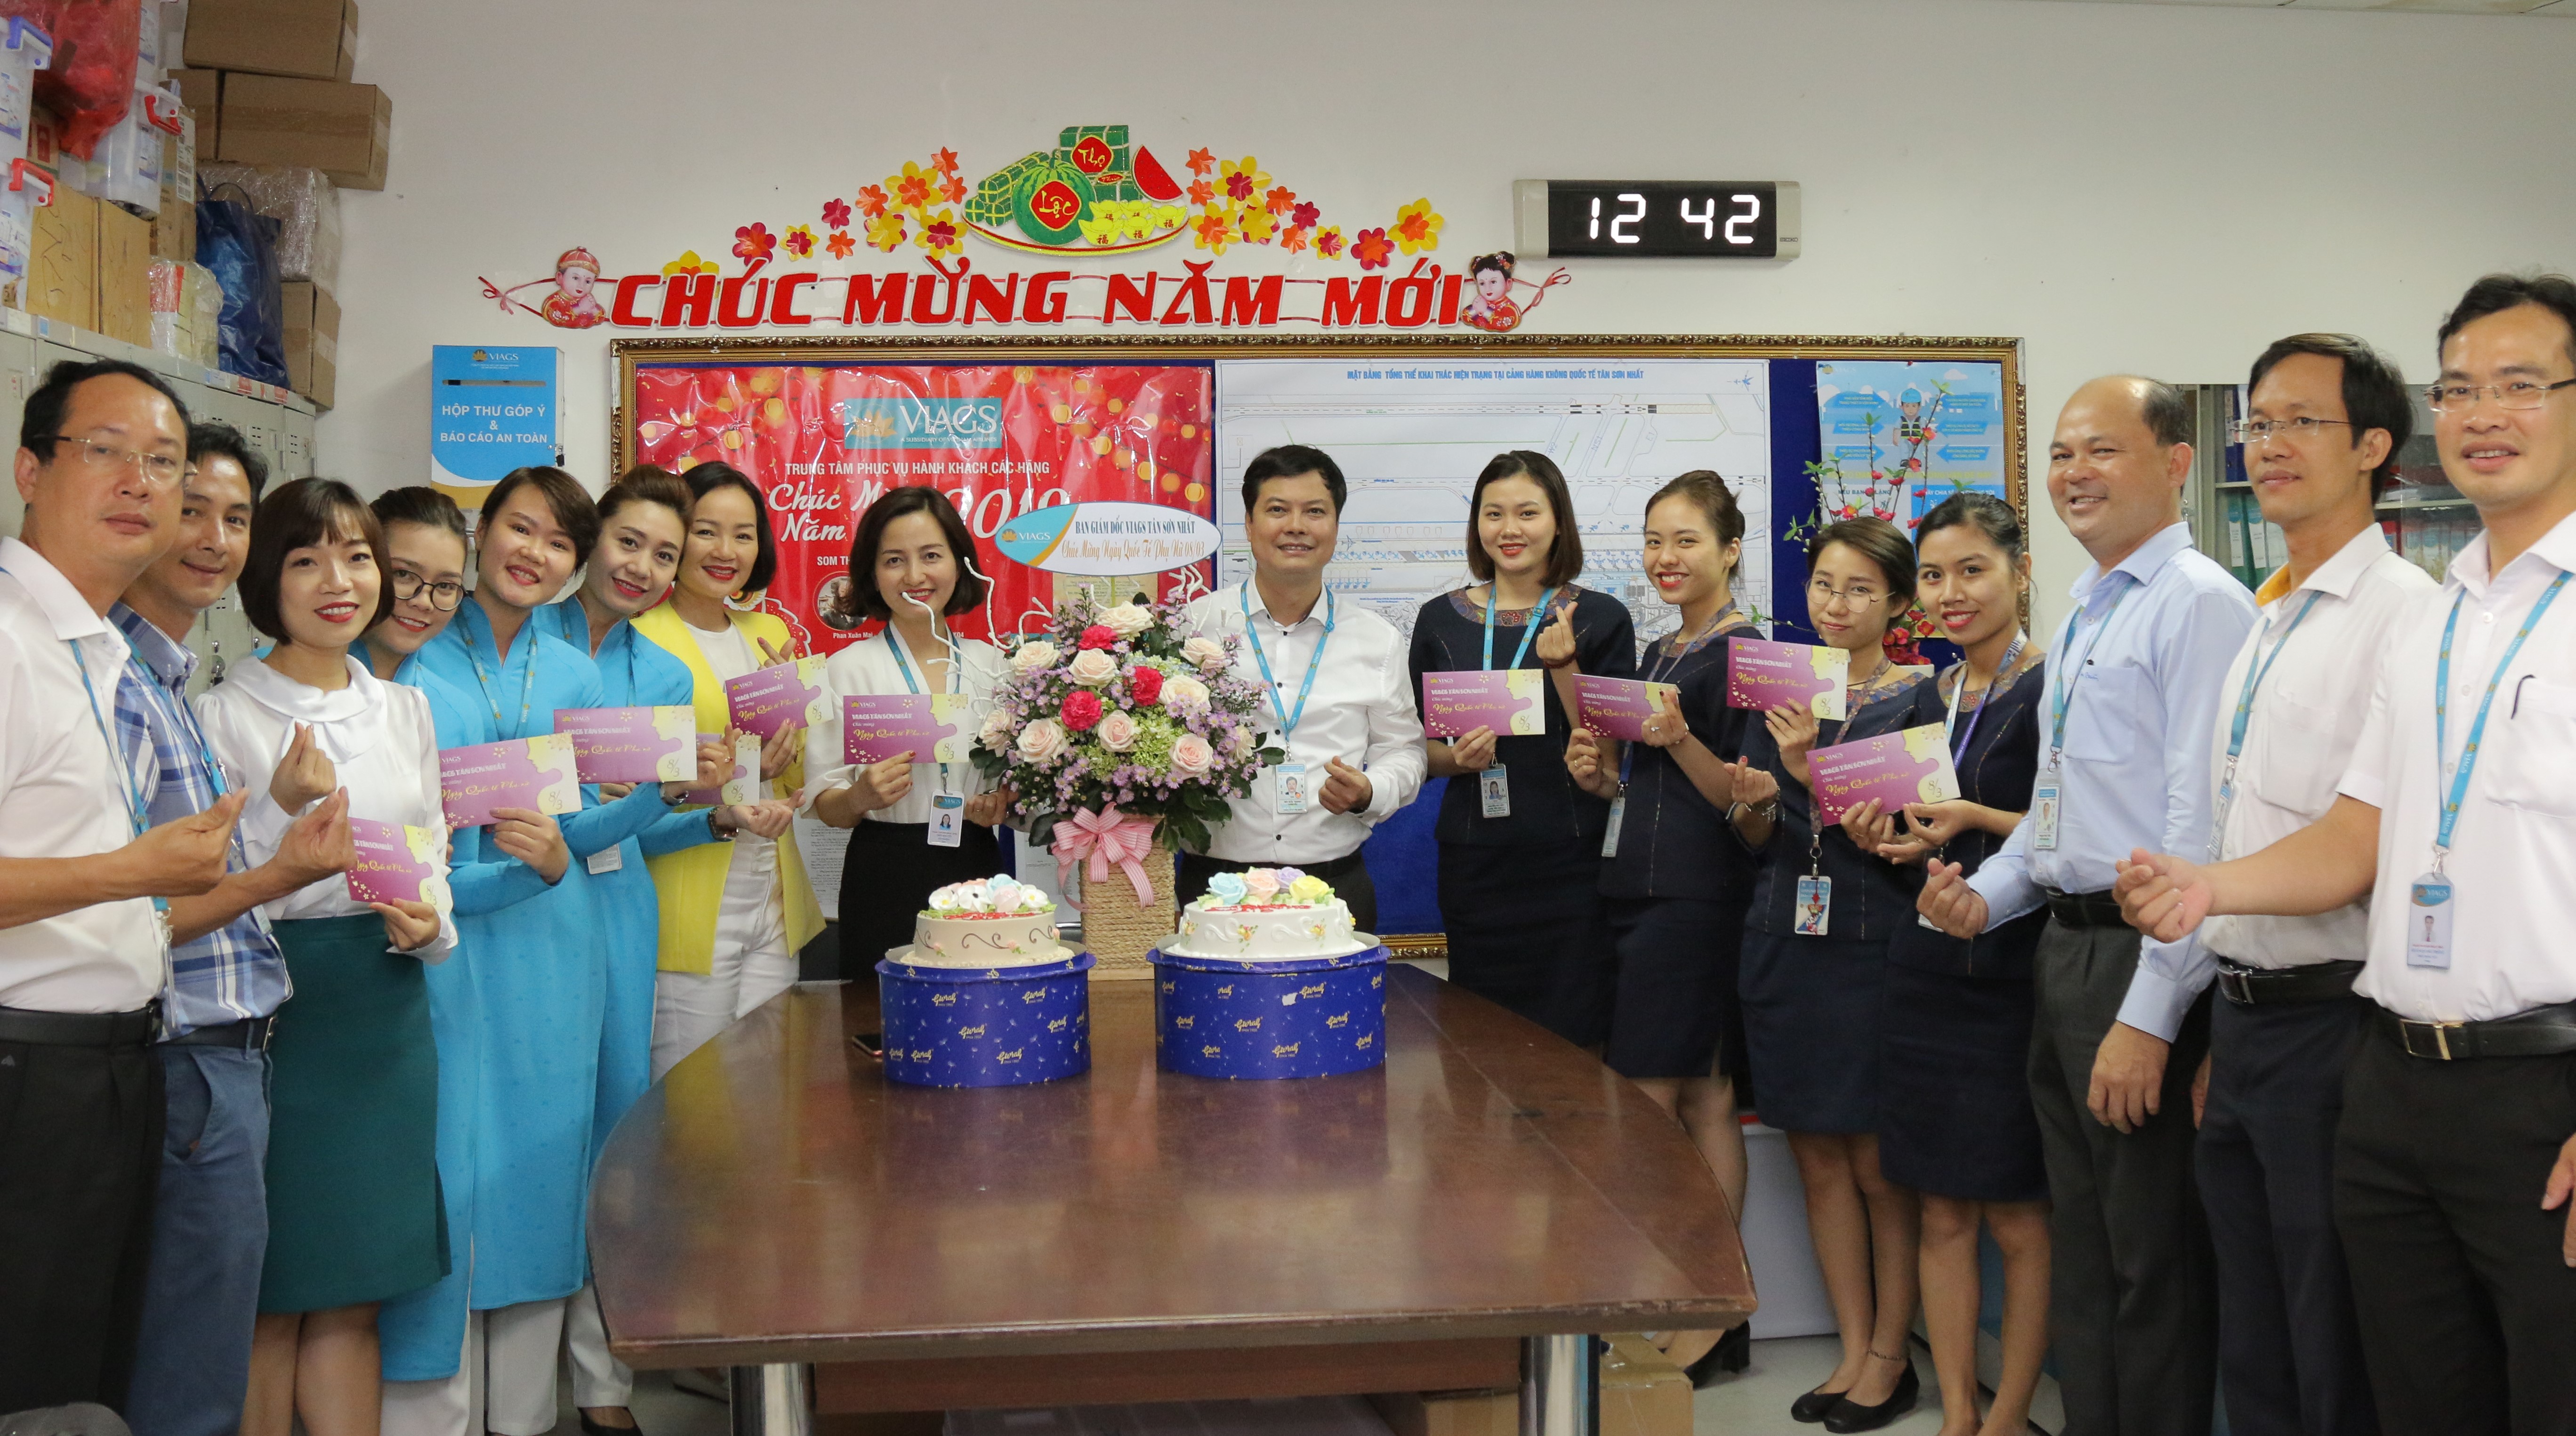 VIAGS TAN SON NHAT HOLDS THE MEETING, WATCHES MOVIES AND CELEBRATES THE FEMALE STAFFS ON THE 109TH ANNIVERSARY OF INTERNATIONAL WOMEN’S DAY 8/3